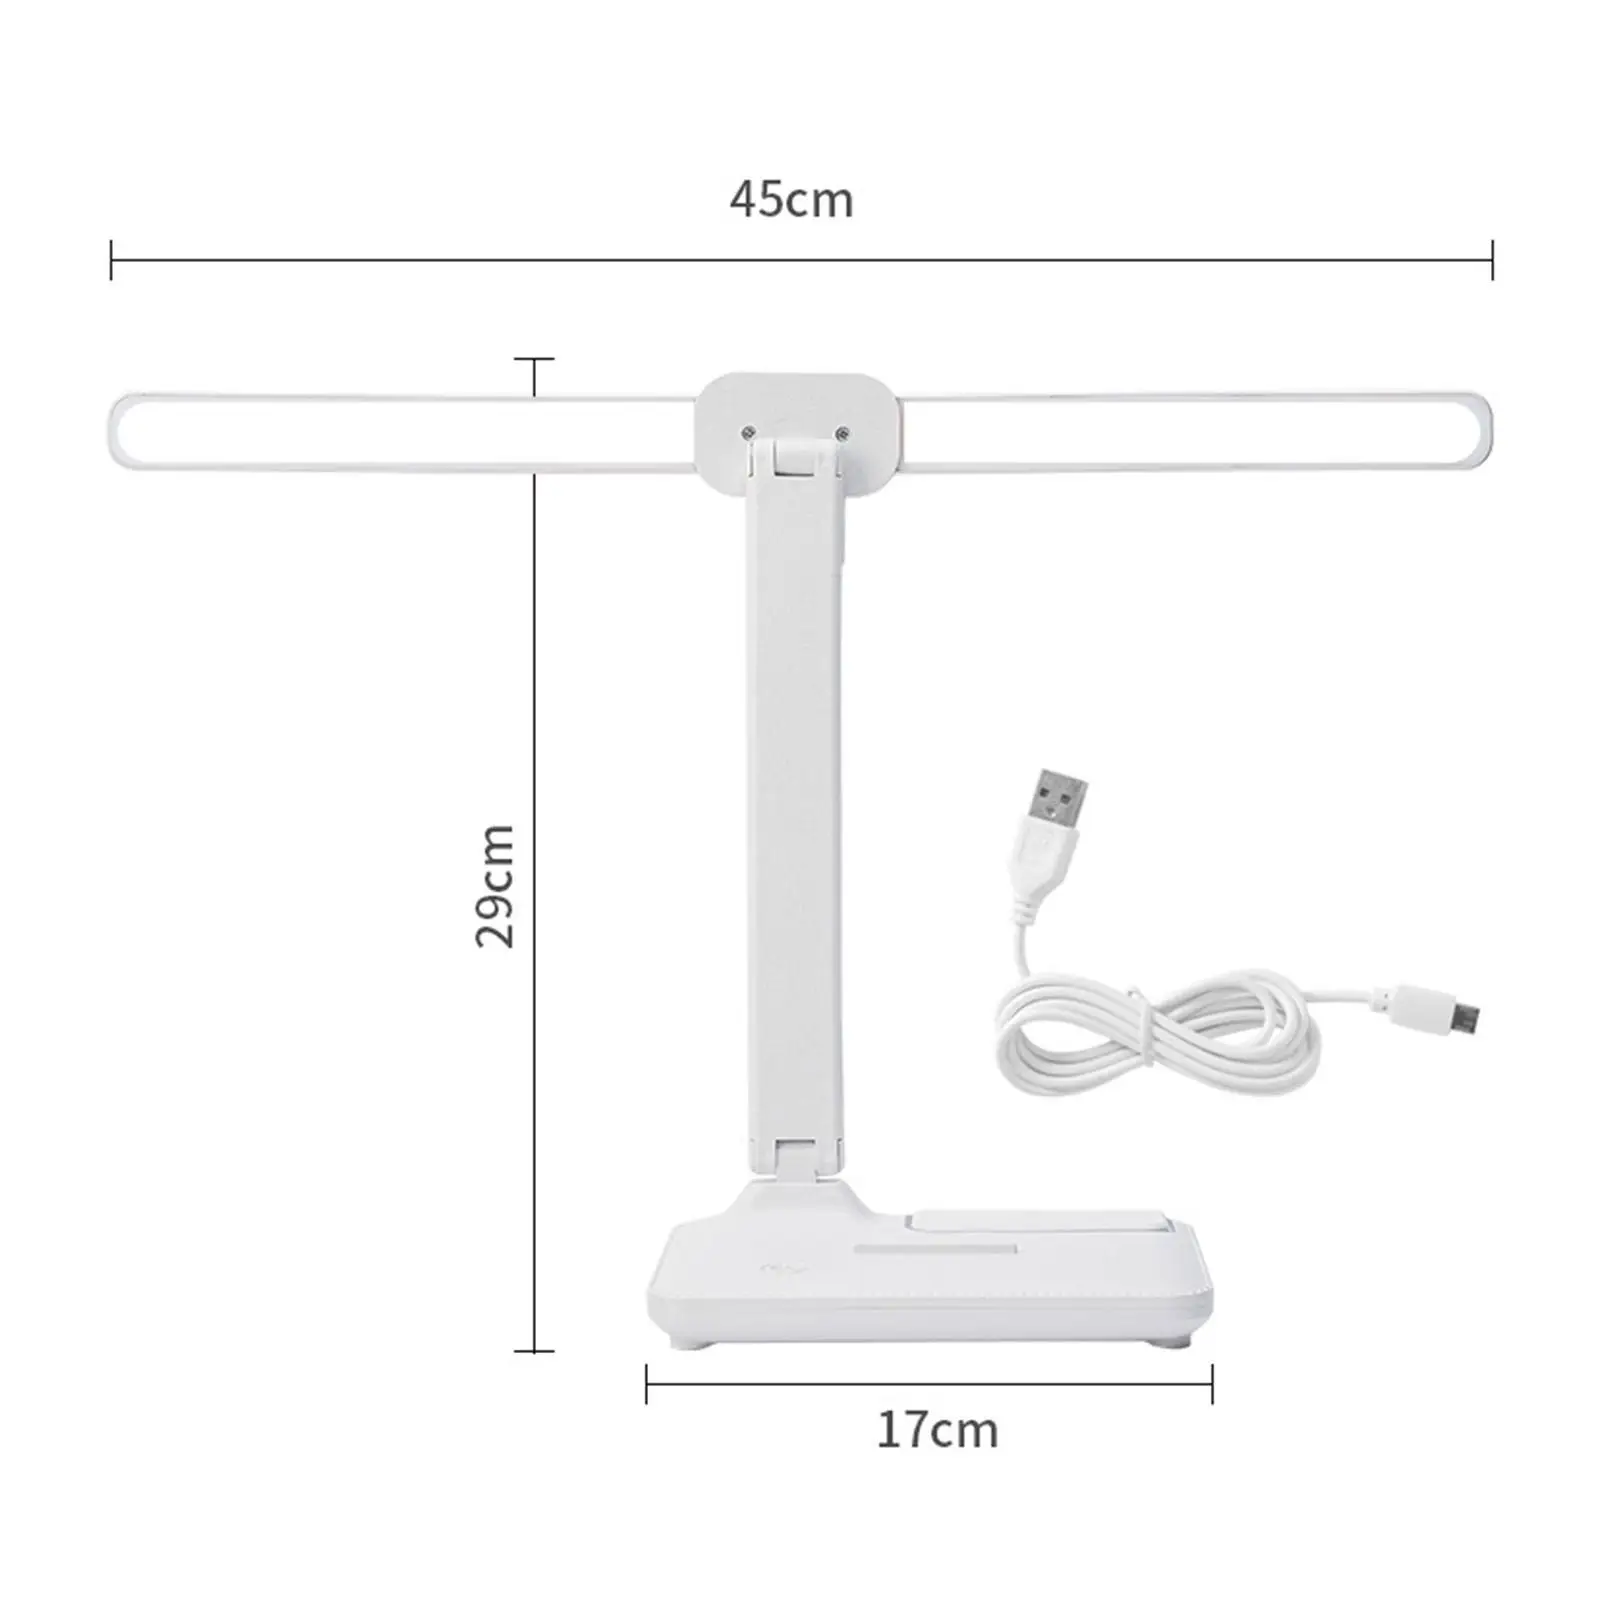 3 Levels Reading Table Lights, Bright Flexible White Protective Double Lamp Type LED Desk Lamp for Work Studying Eye 